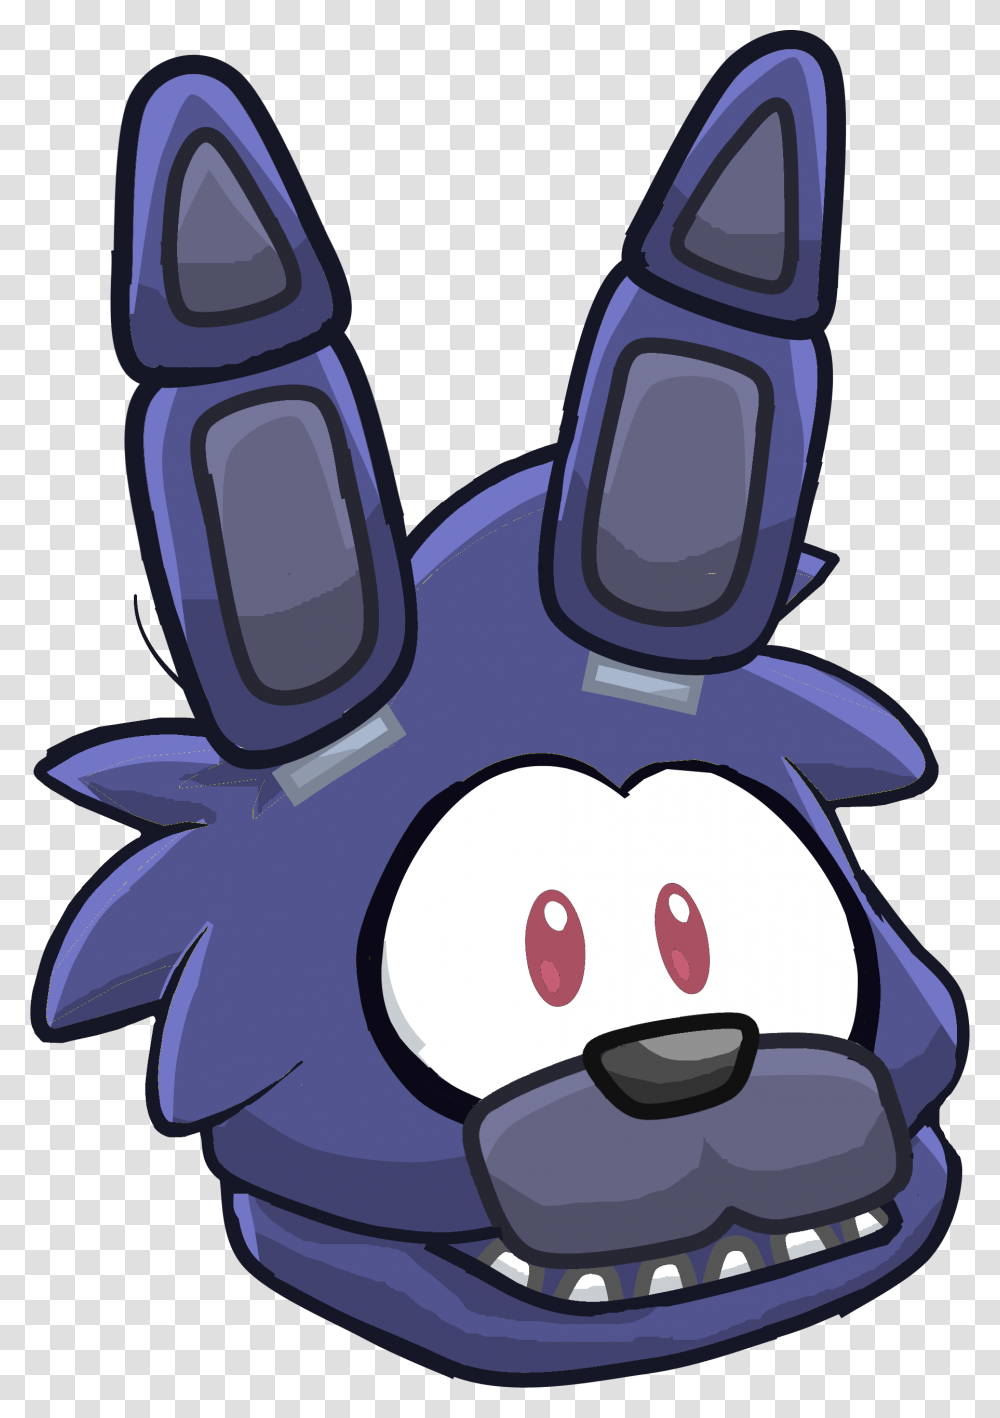 Puffle Bonnie Five Nights At Freddyquots Club Penguin Club Penguin Puffles Fnaf, Angry Birds, Cushion Transparent Png